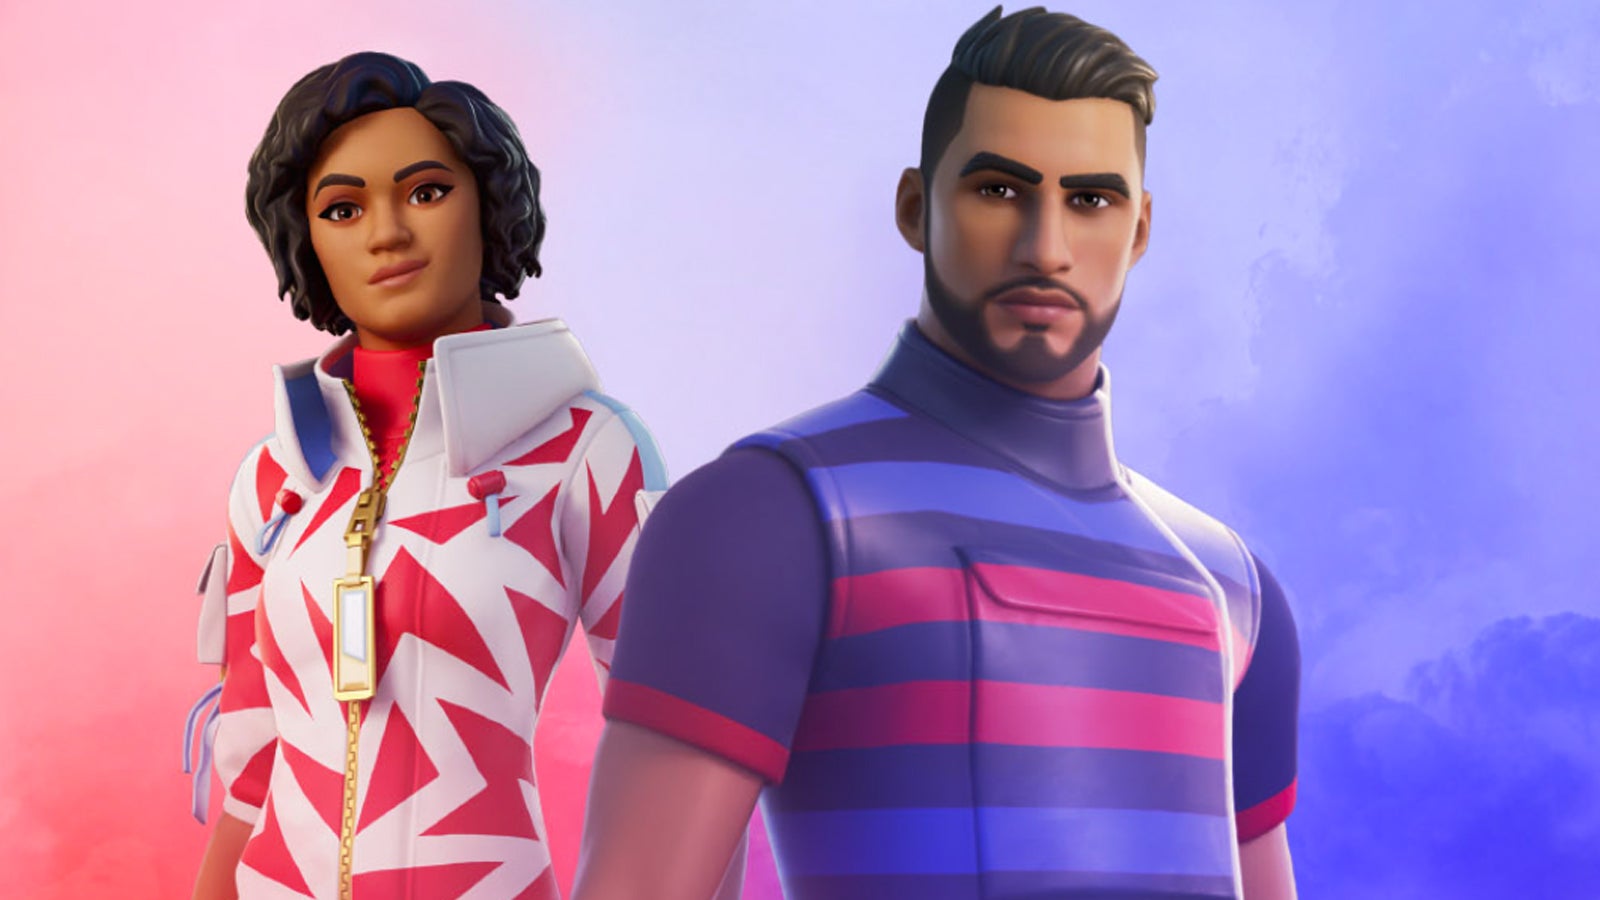 Fortnite's Let Them Know characters.